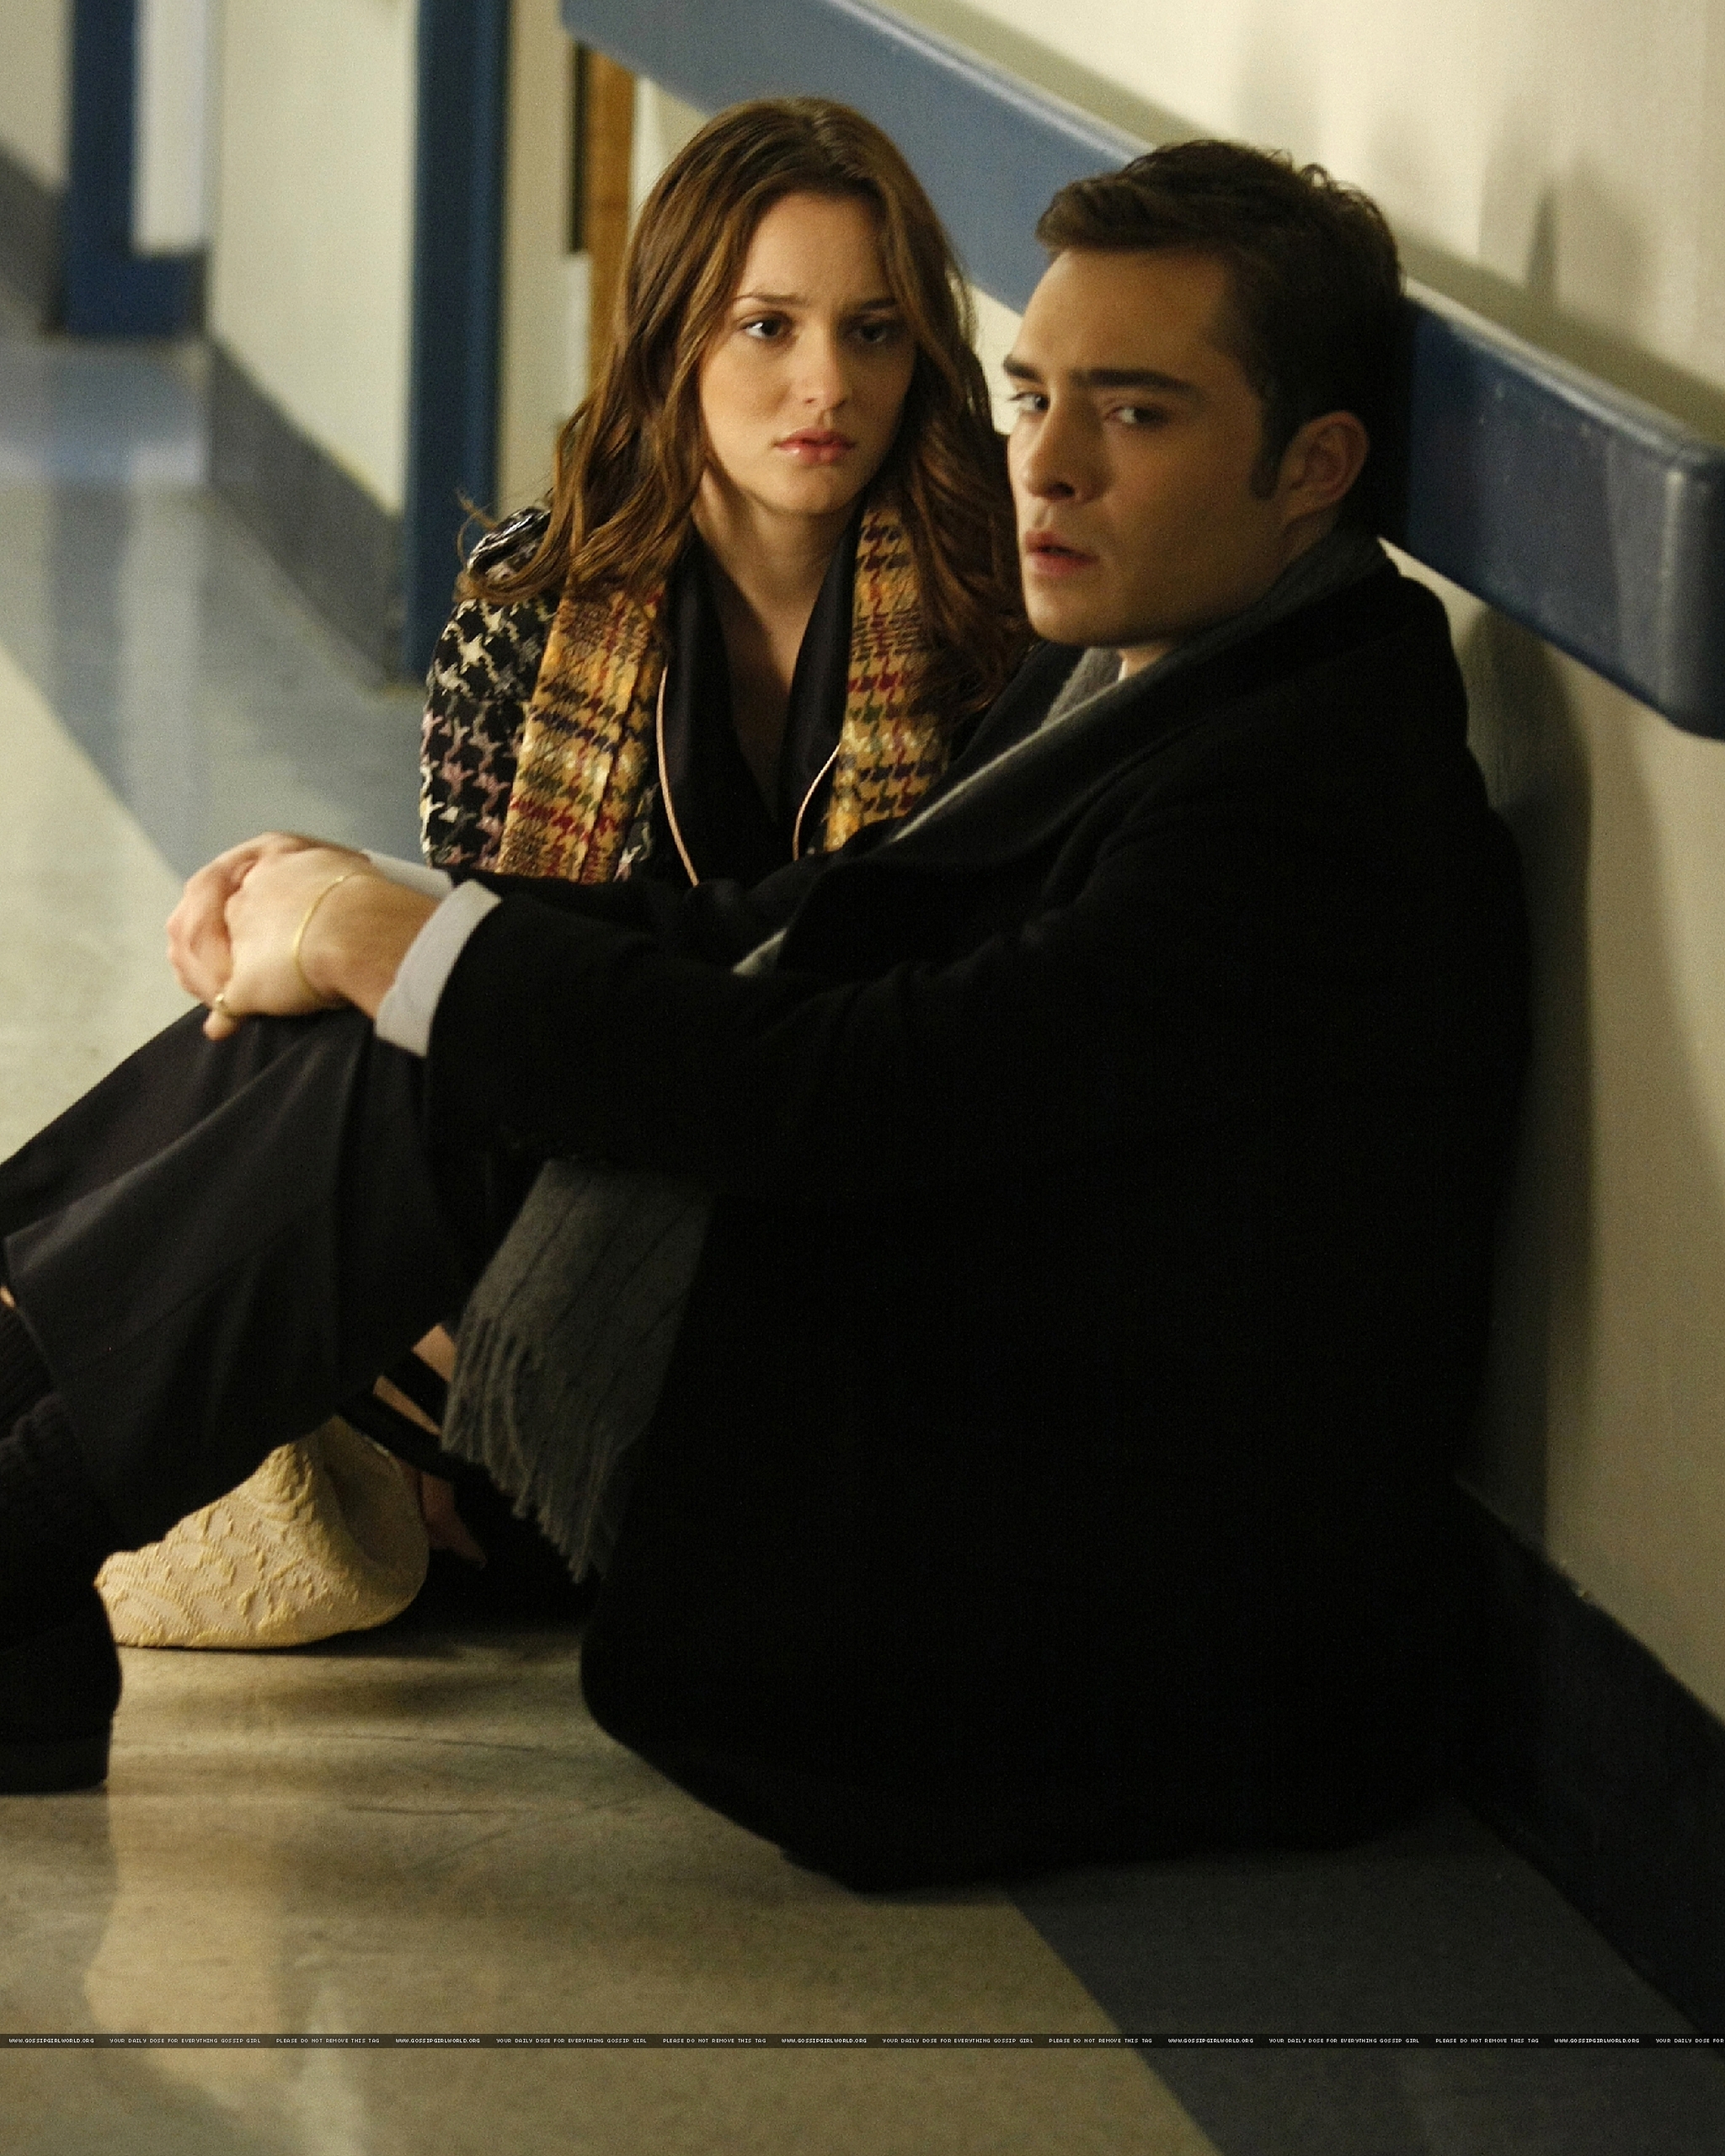 Gossip Girl' recap: Chuck and Blair save each other and the episode